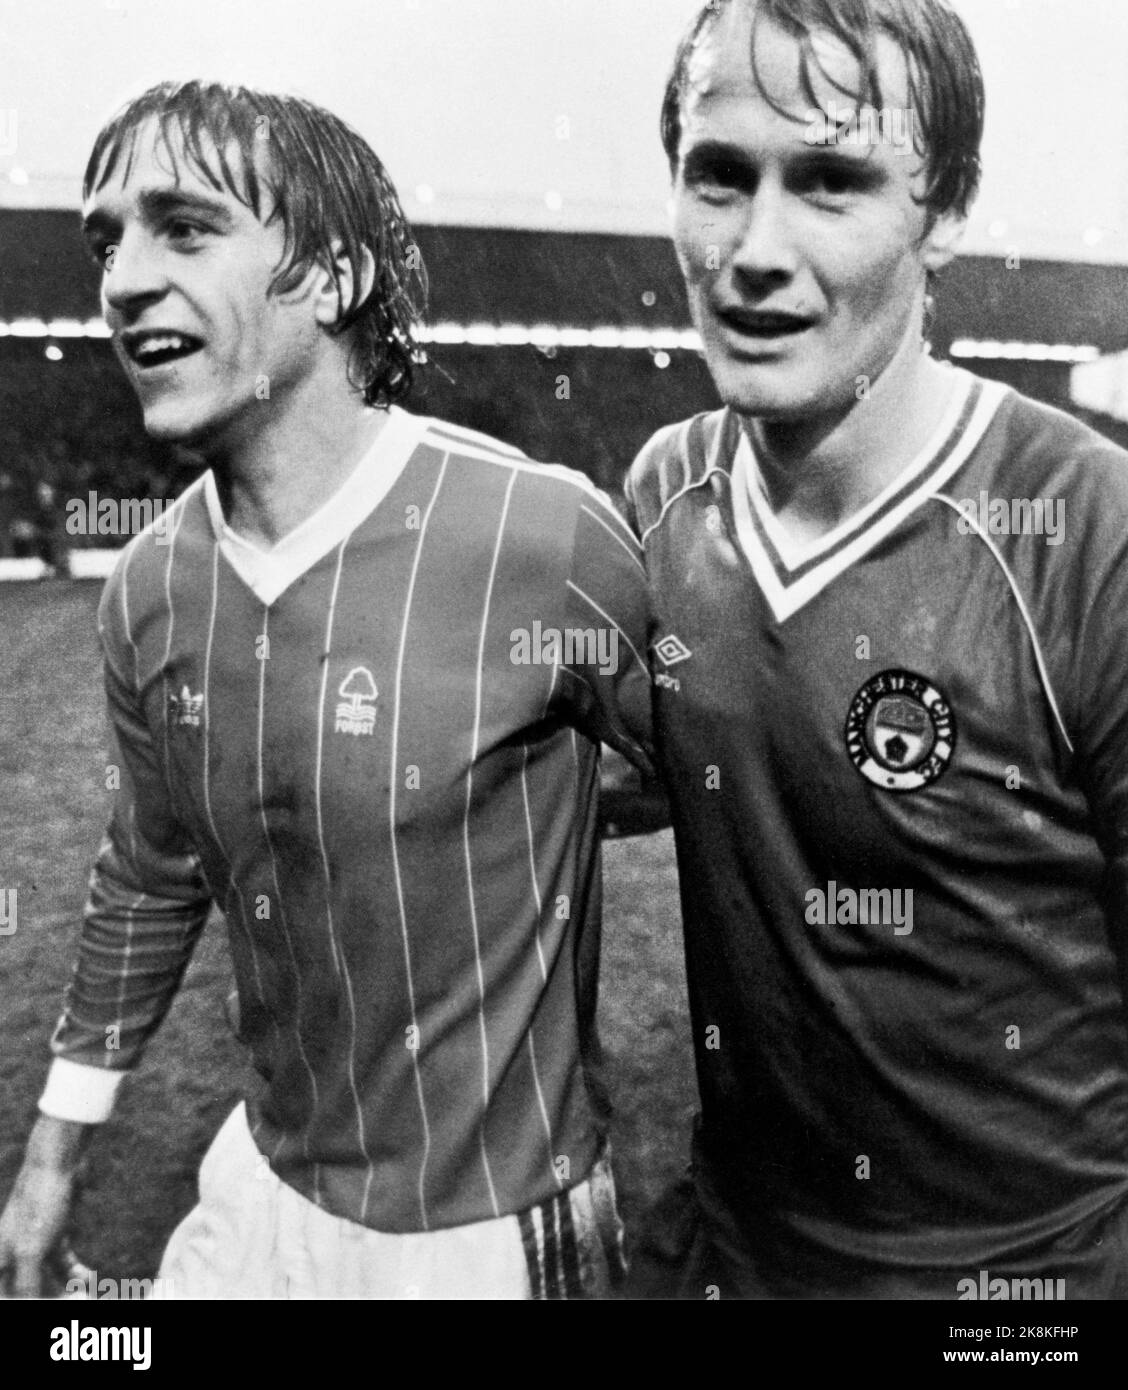 England 19811024. For the first time Norwegians as opponents in English 1st Division. Einar Aas (t.v.) and Åge Hareide. (Nottingham Forest and Manchester City) Photo: Arild Jakobsen / NTB Archive / NTB Stock Photo